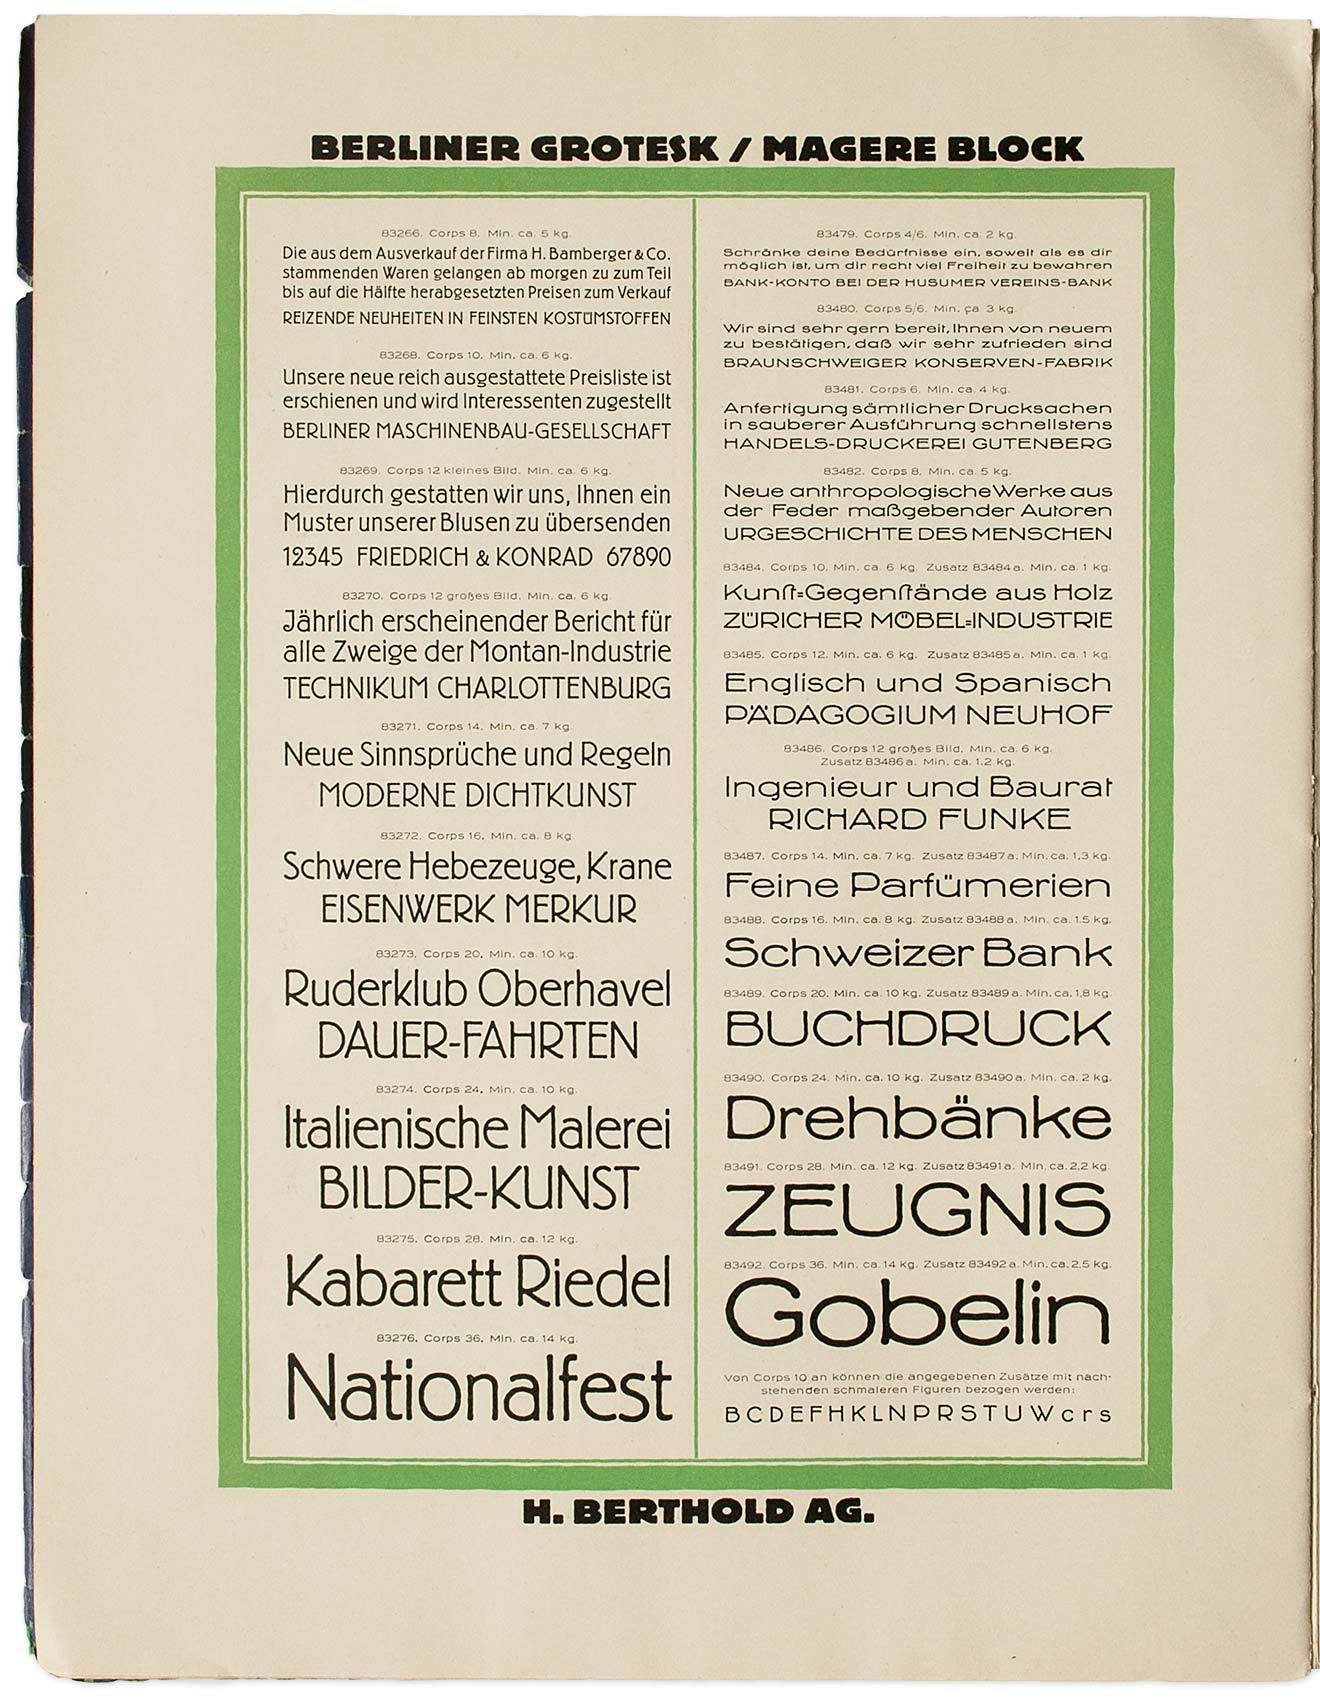 Berthold’s Berliner Grotesk (1913) is a serif-less companion to the Bravour-Epoche-Glass Antiqua-clique. It is also a relative of the Block family, precisely a somewhat condensed version of Block’s mager (light) weight, as seen in the specimen above. (With kind permission from the collection of Erik Spiekermann.)